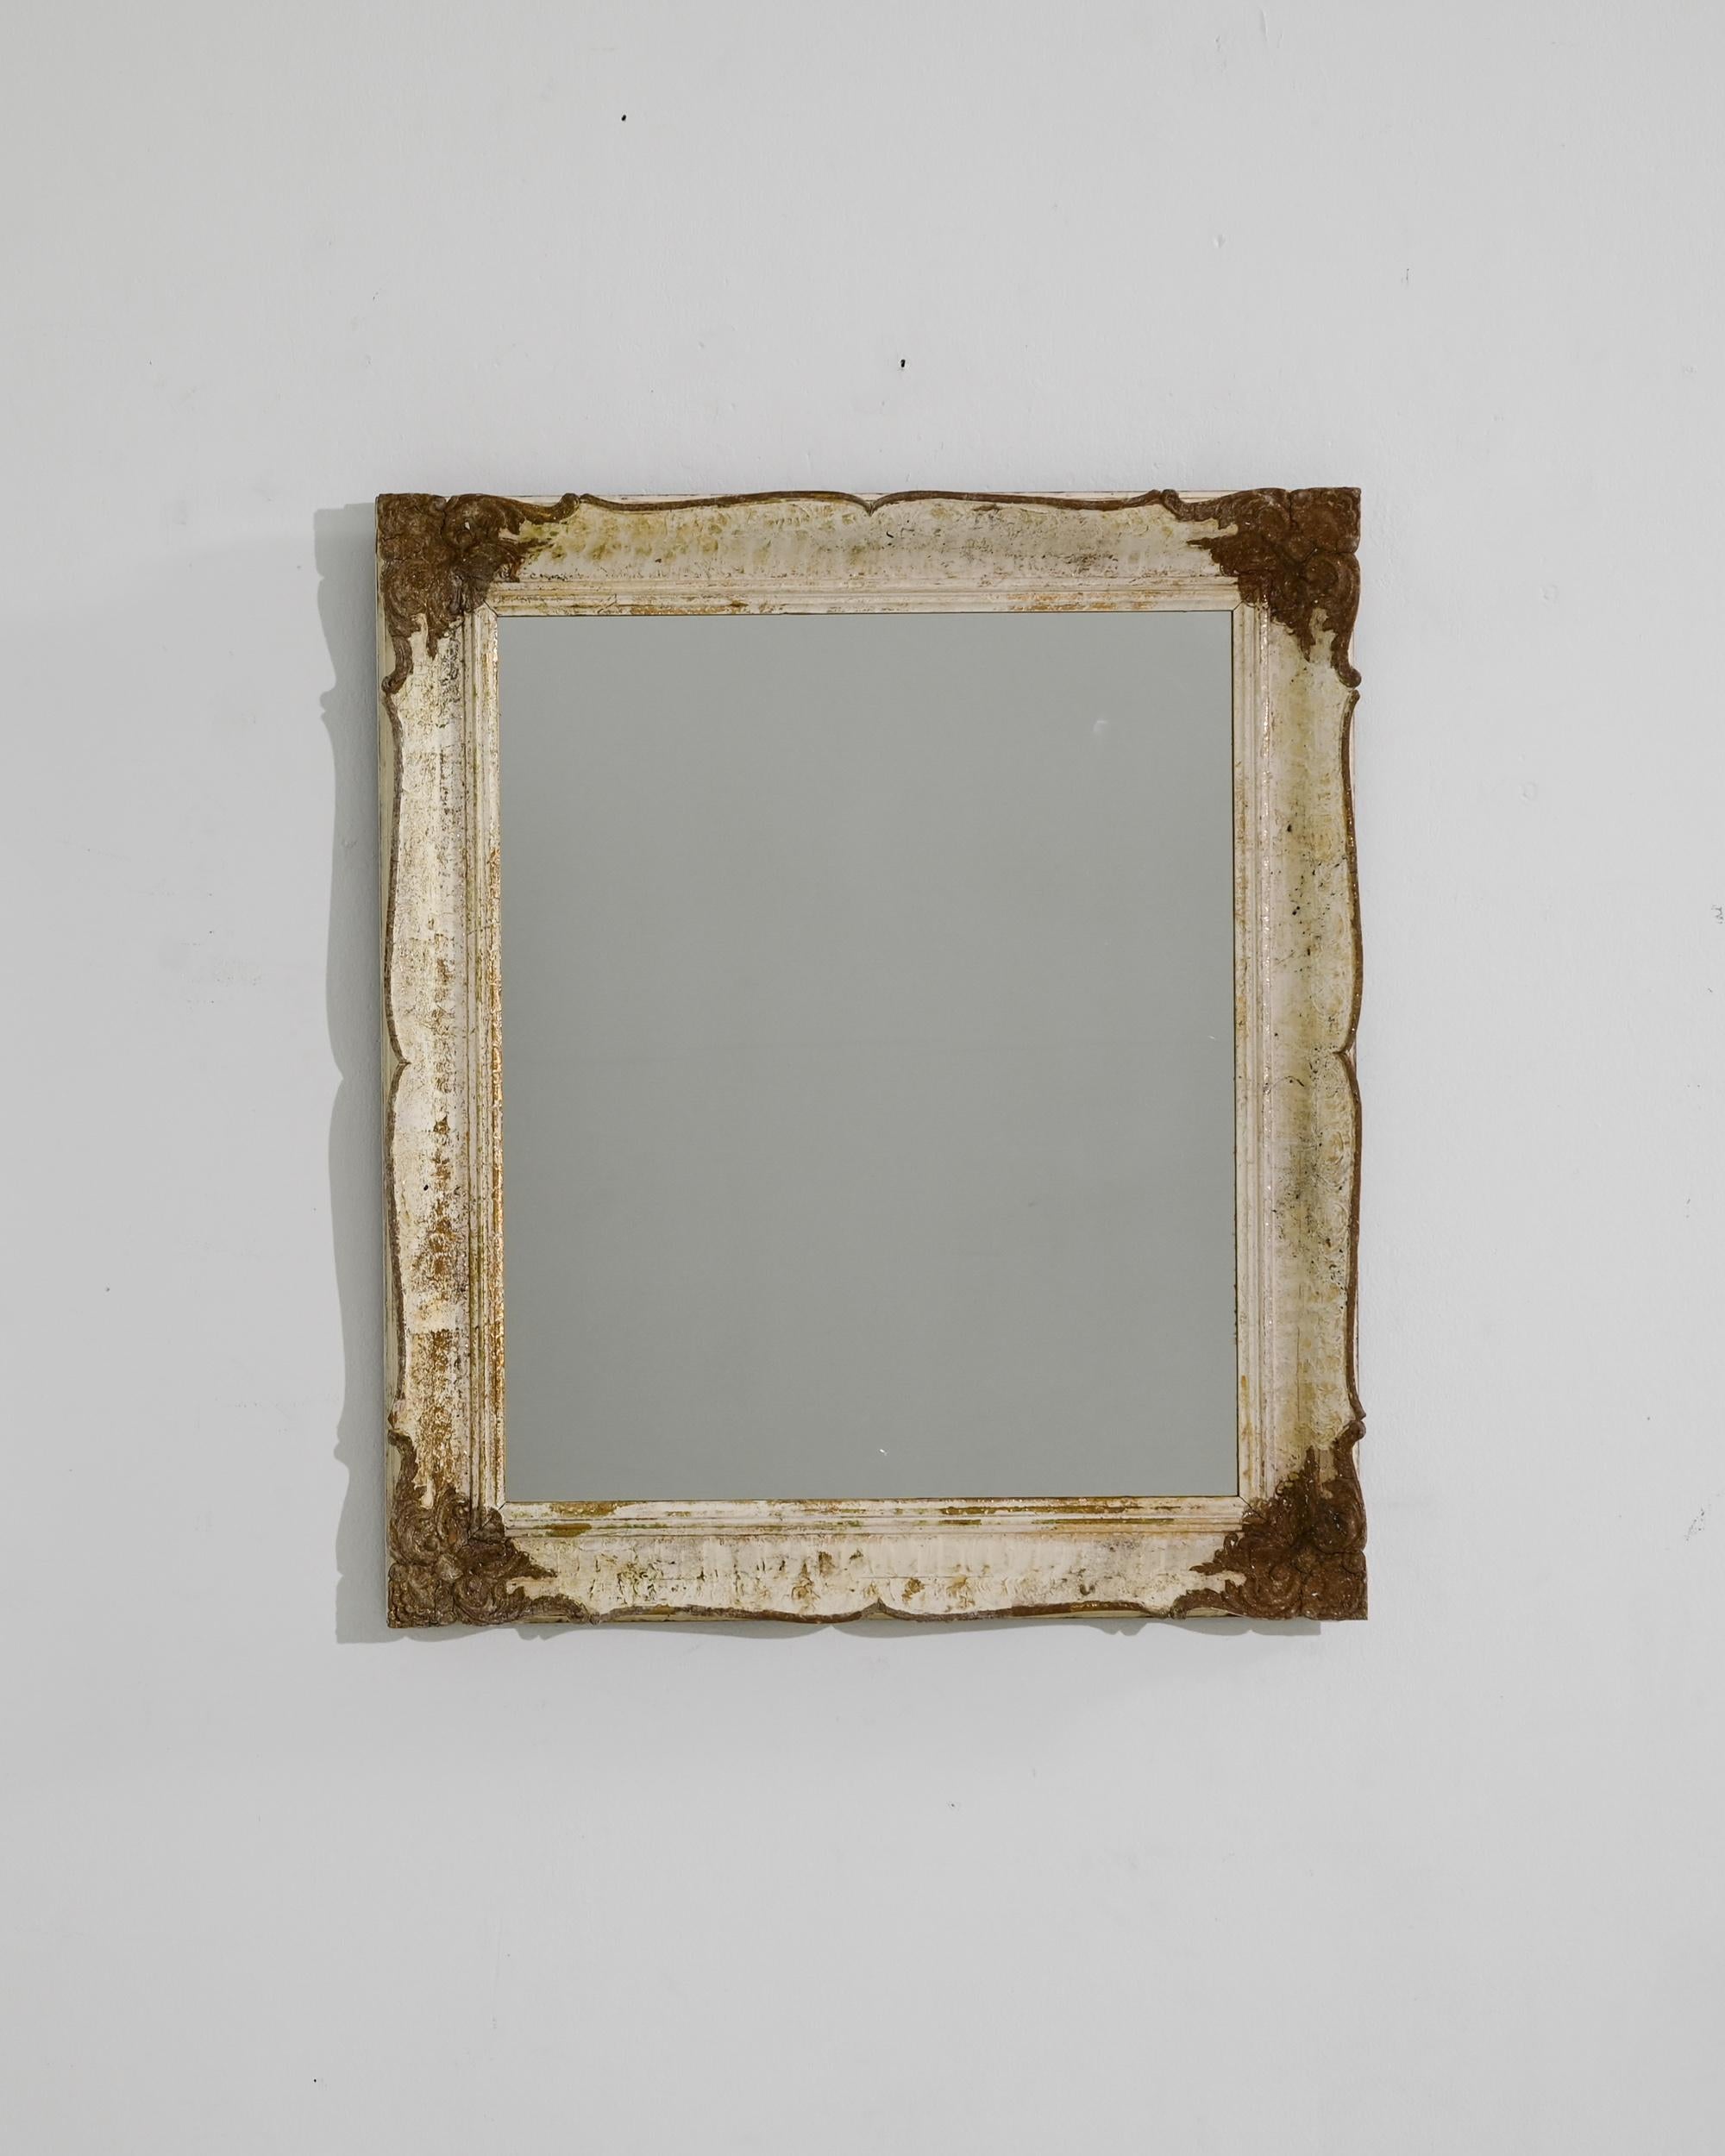 Mirror mirror, this enchanting antique was crafted in France, circa 1920. Made to reflect the fairest, this magic mirror tells the story of life in another era. Profiled edges were carved by hand, lending a refined expression to the minimal shape;